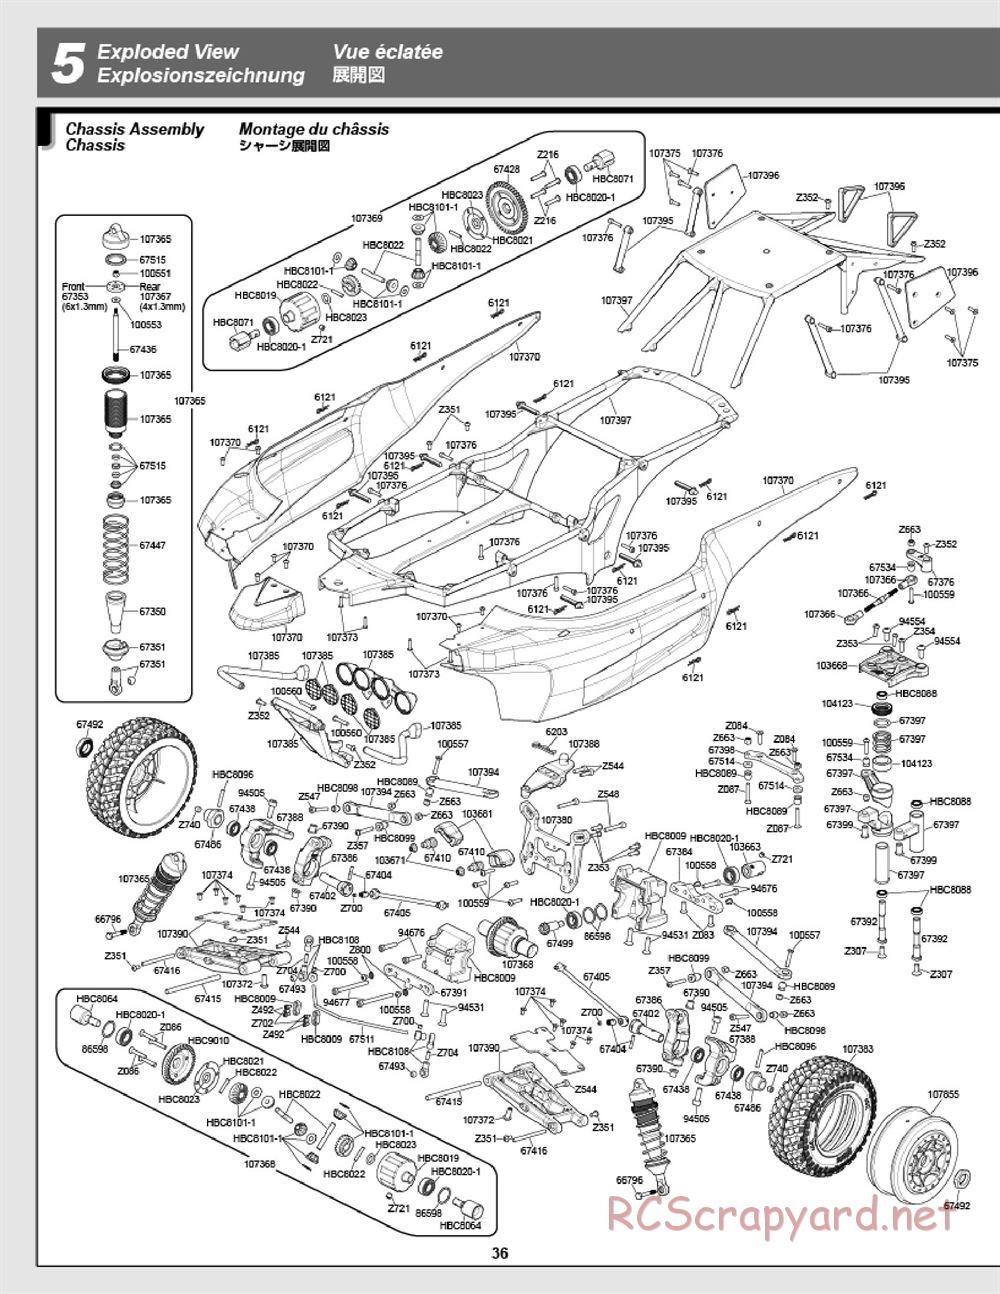 HPI - Apache C1 Flux - Exploded View - Page 36